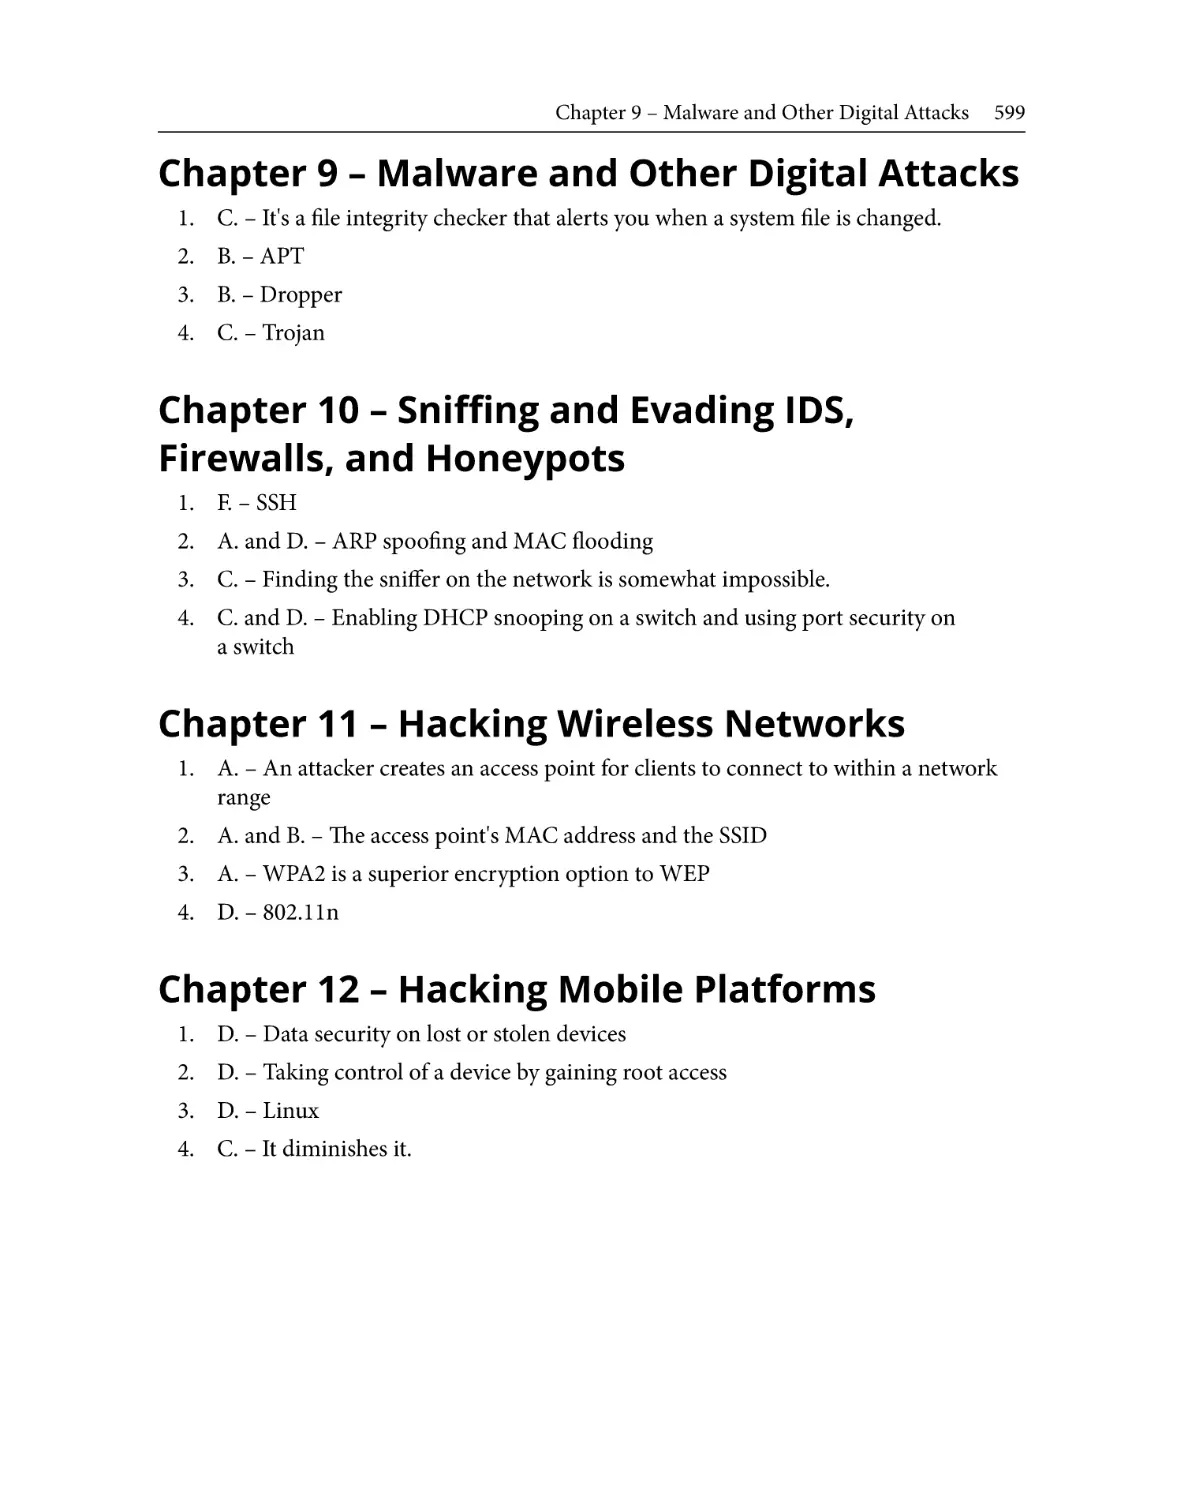 Chapter 9 – Malware and Other Digital Attacks
Chapter 10 – Sniffing and Evading IDS, Firewalls, and Honeypots
Chapter 11 – Hacking Wireless Networks
Chapter 12 – Hacking Mobile Platforms